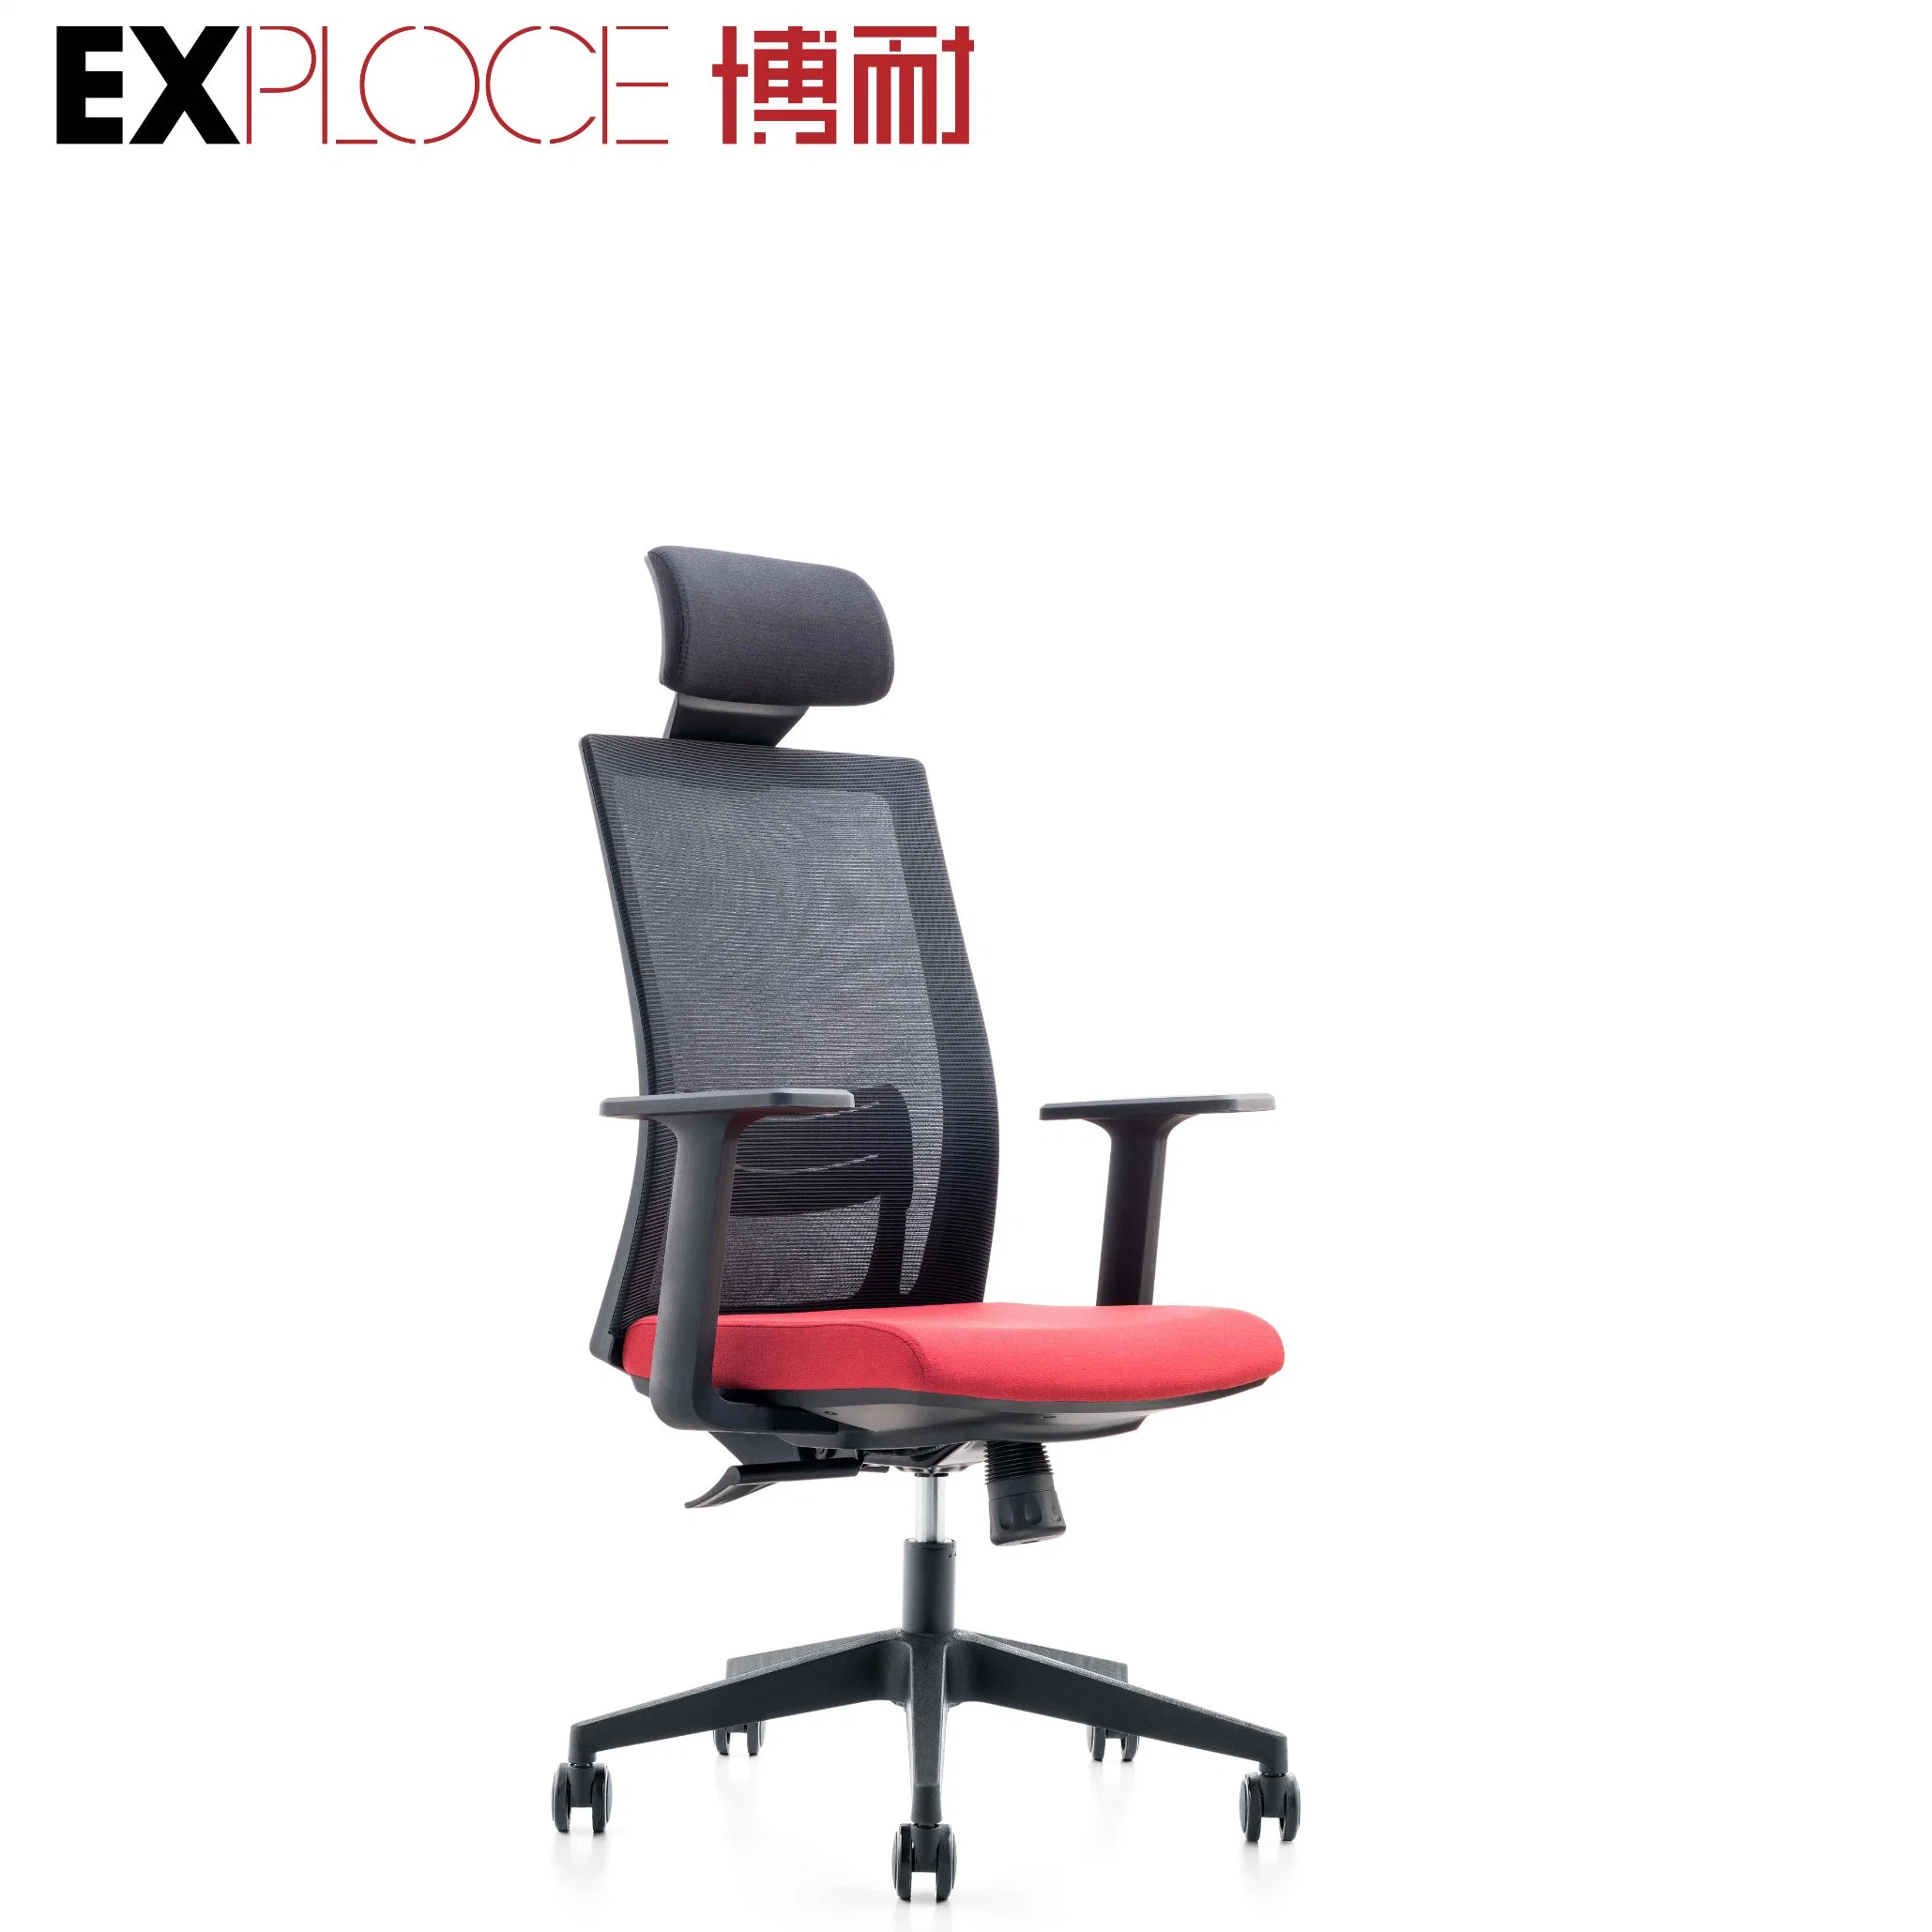 Home Office Ergonomic Desk Mesh Computer Chair with Lumbar Support Armrest Executive Gaming